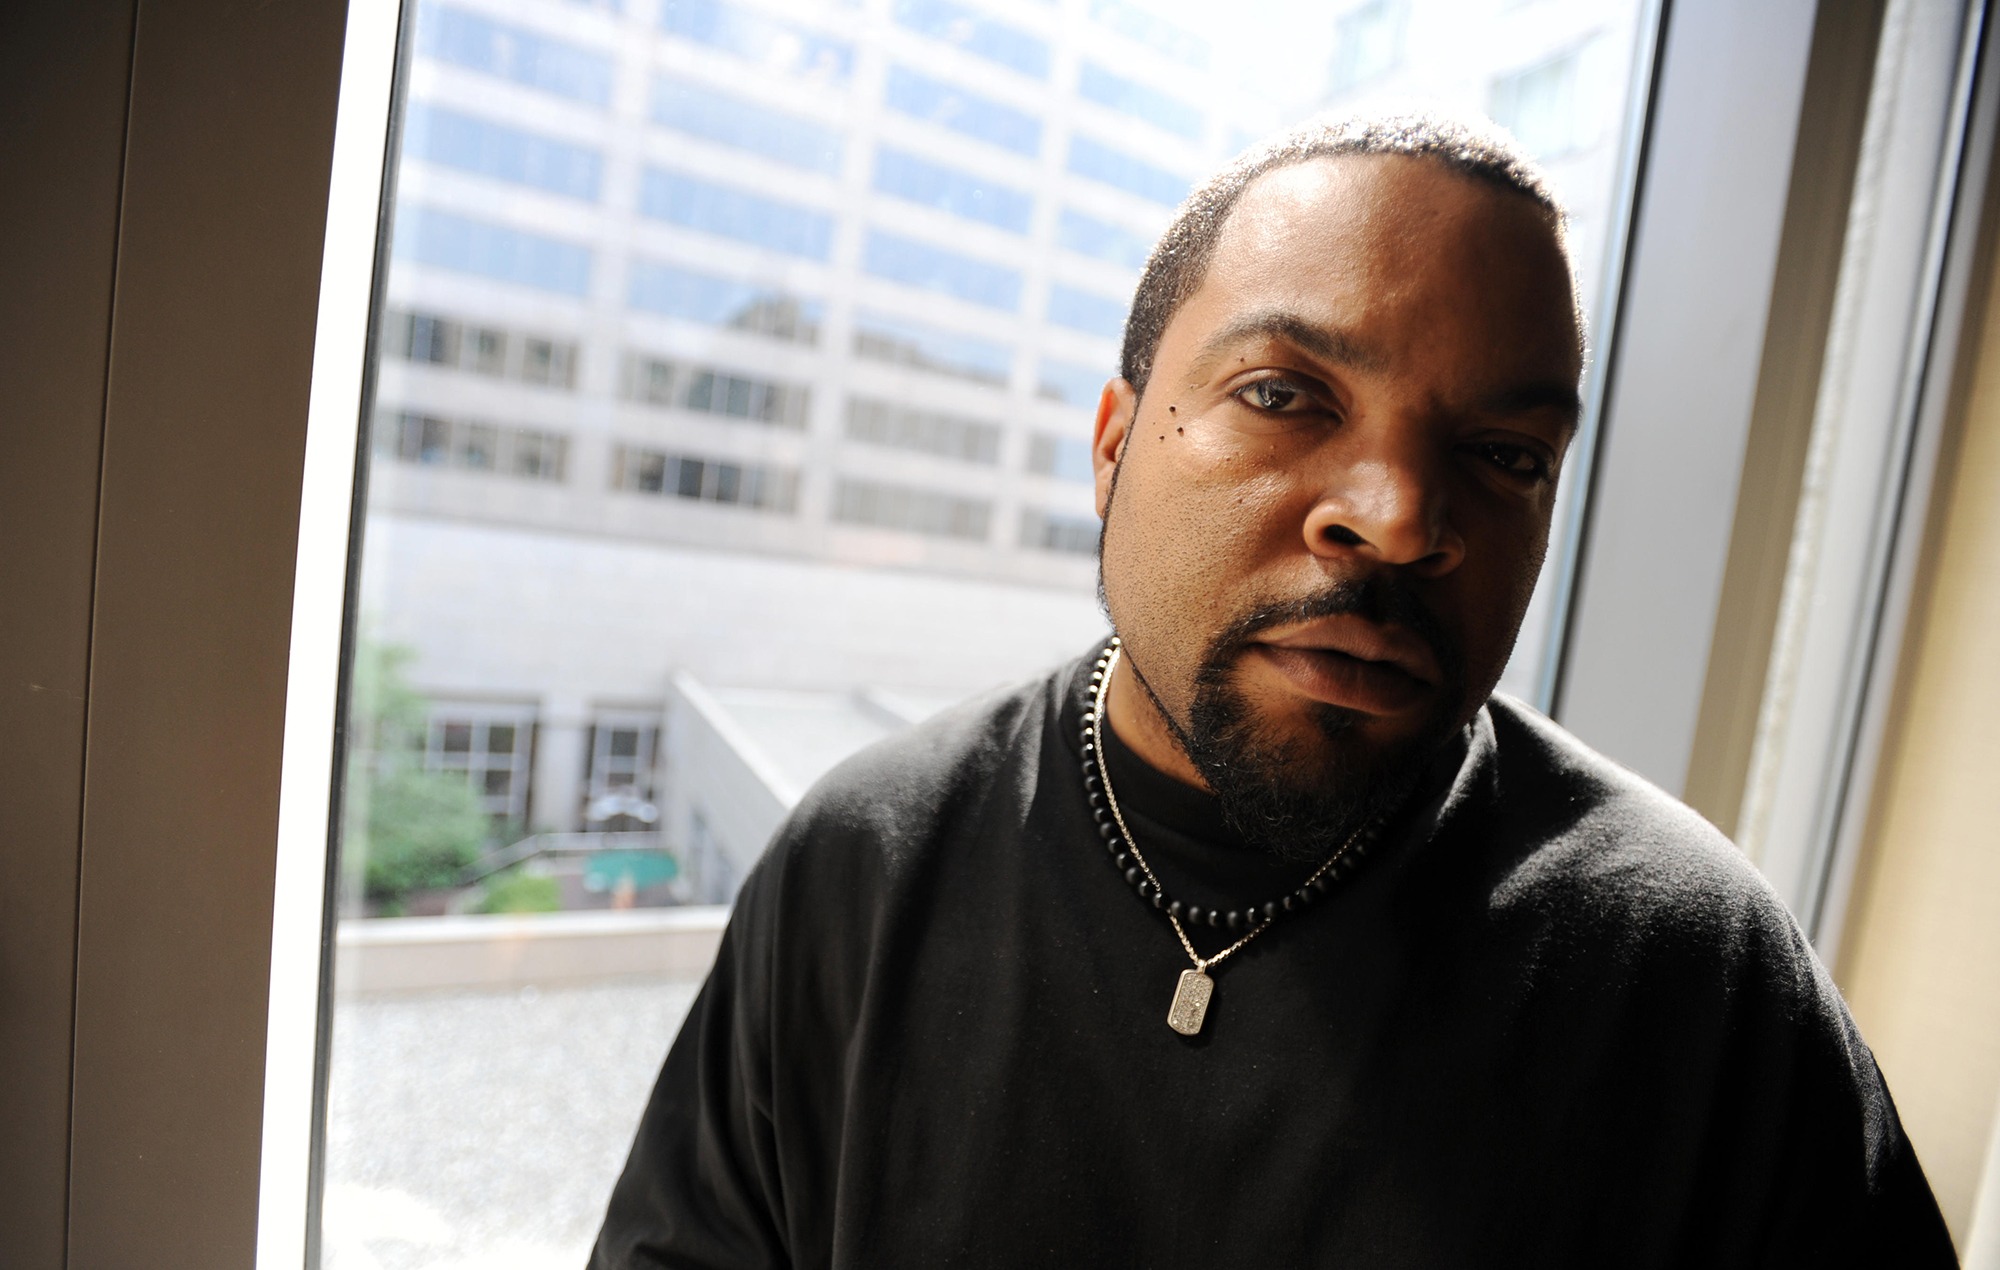 Ice Cube: “You can change the law faster than you can change people’s hearts”